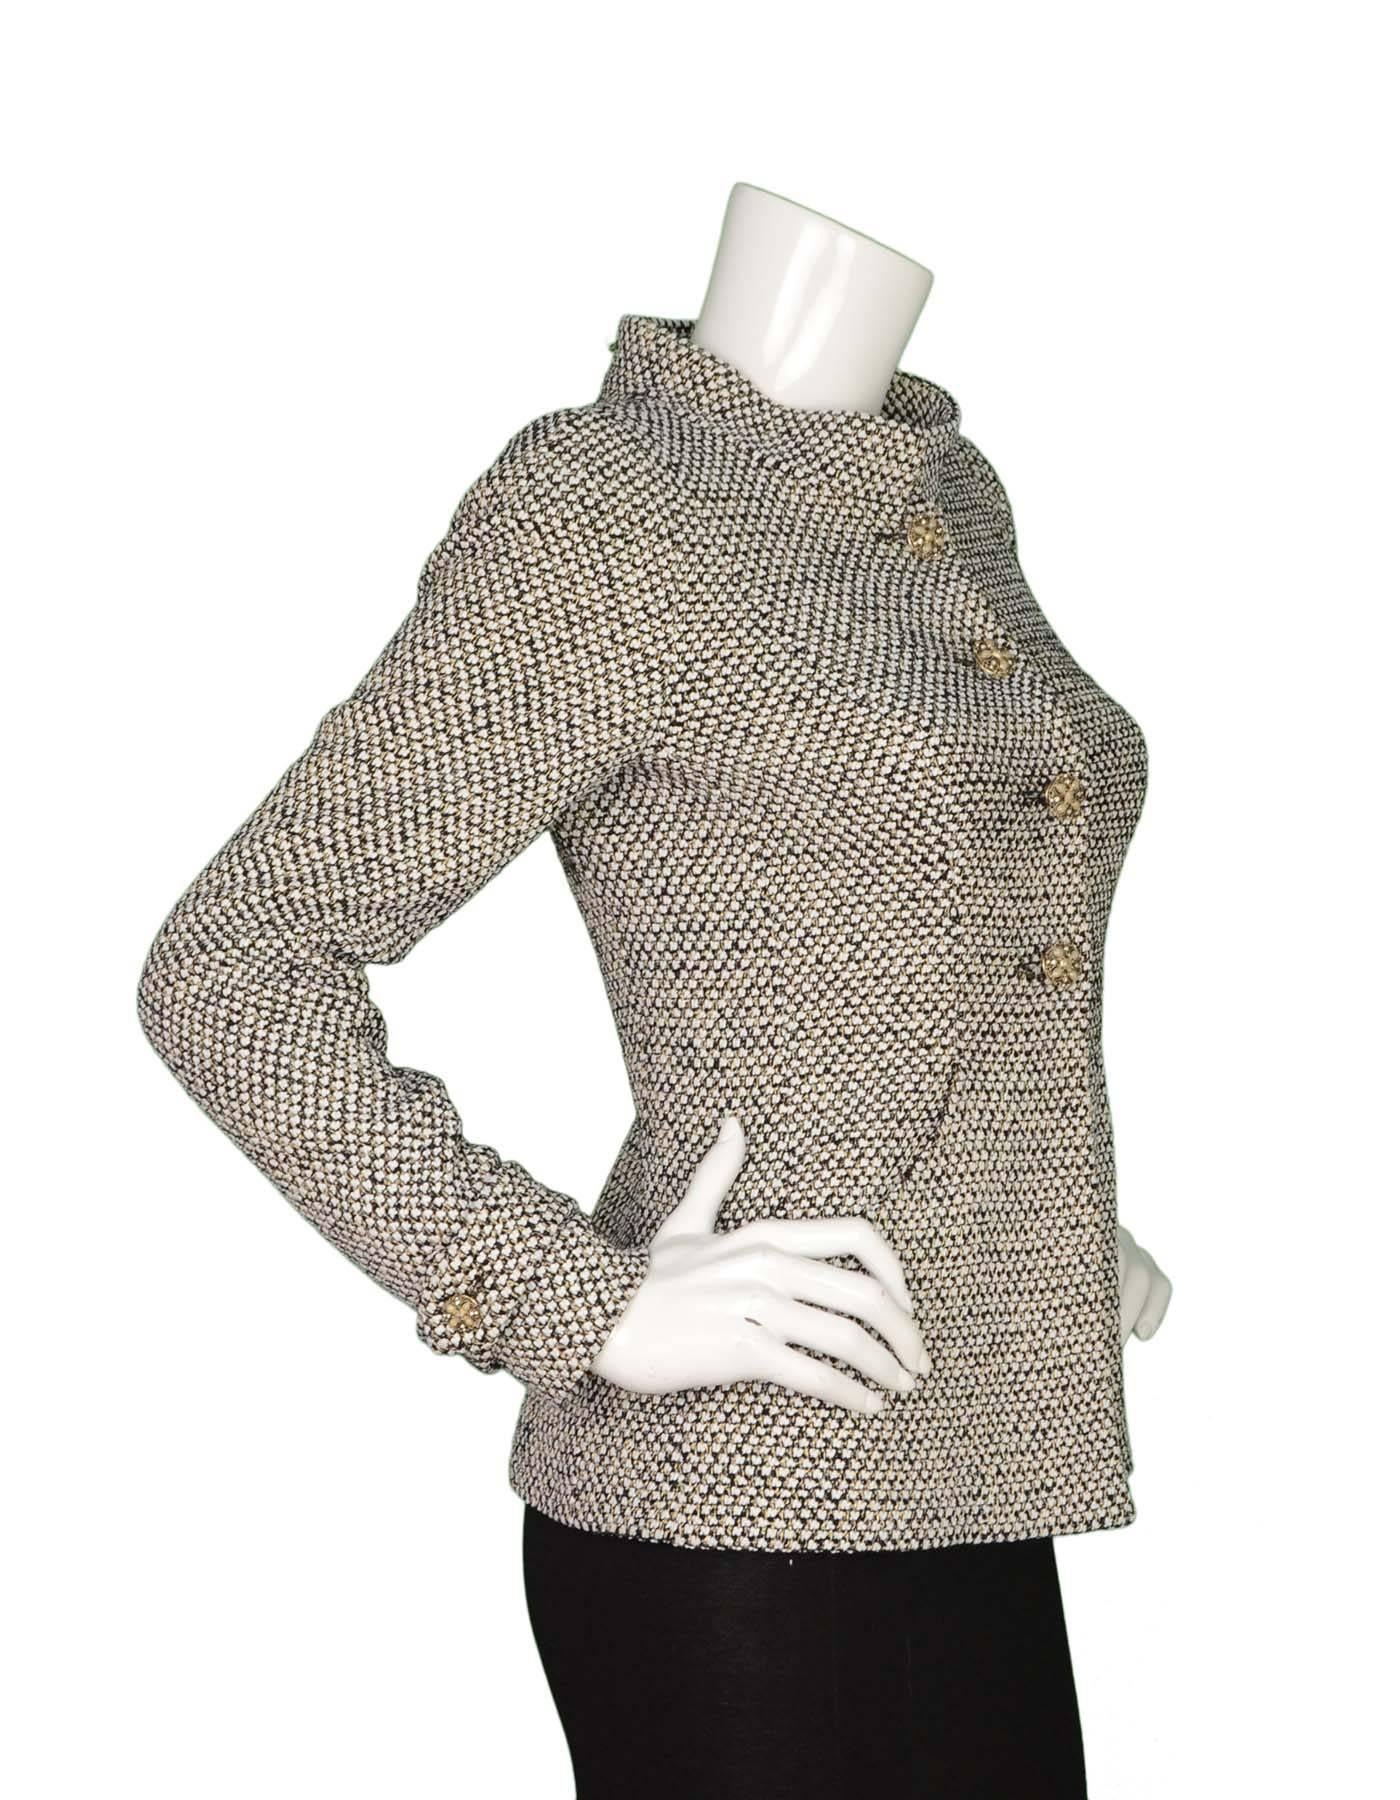 Chanel Black & White Boucle Jacket sz 36
Features decorative jeweled button with a stand collar
Made In: France
Color: Black and white 
Composition: 36% Nylon, 25% wool, 20% rayon, 10% silk, 9% polyester
Lining: Grey, 100%